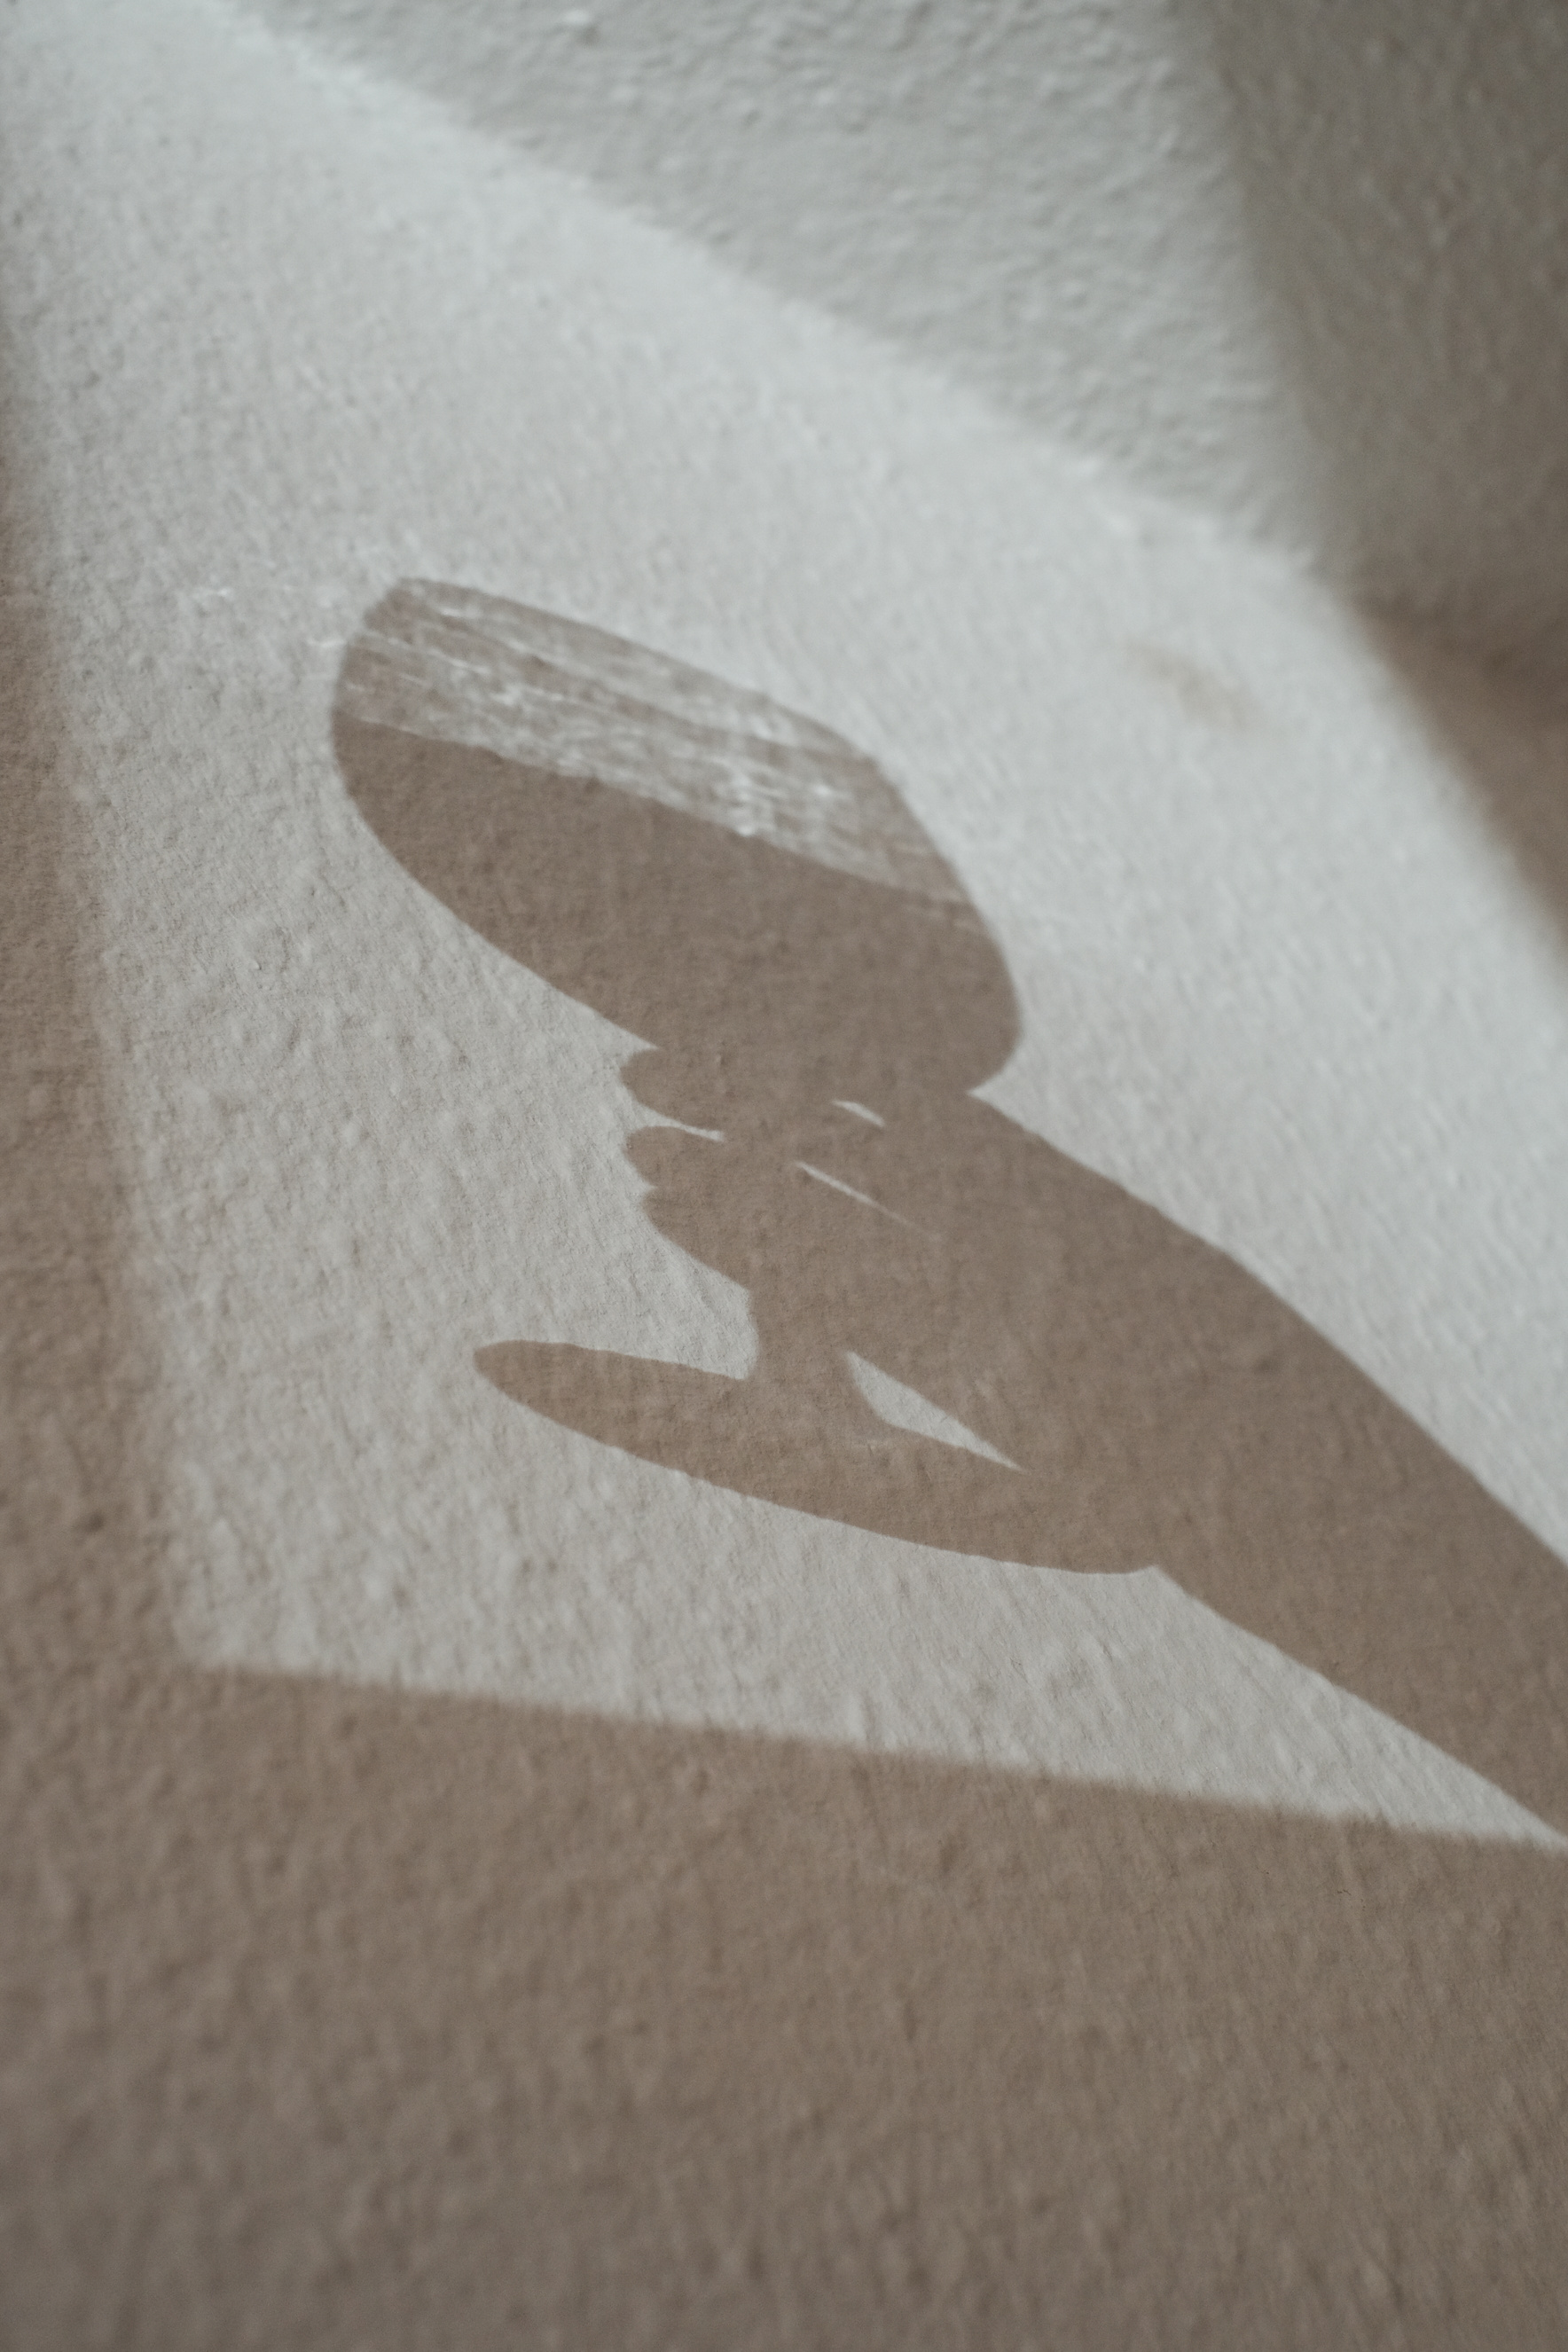 Shadow of a Person's Hand Holding a Glass of Drink